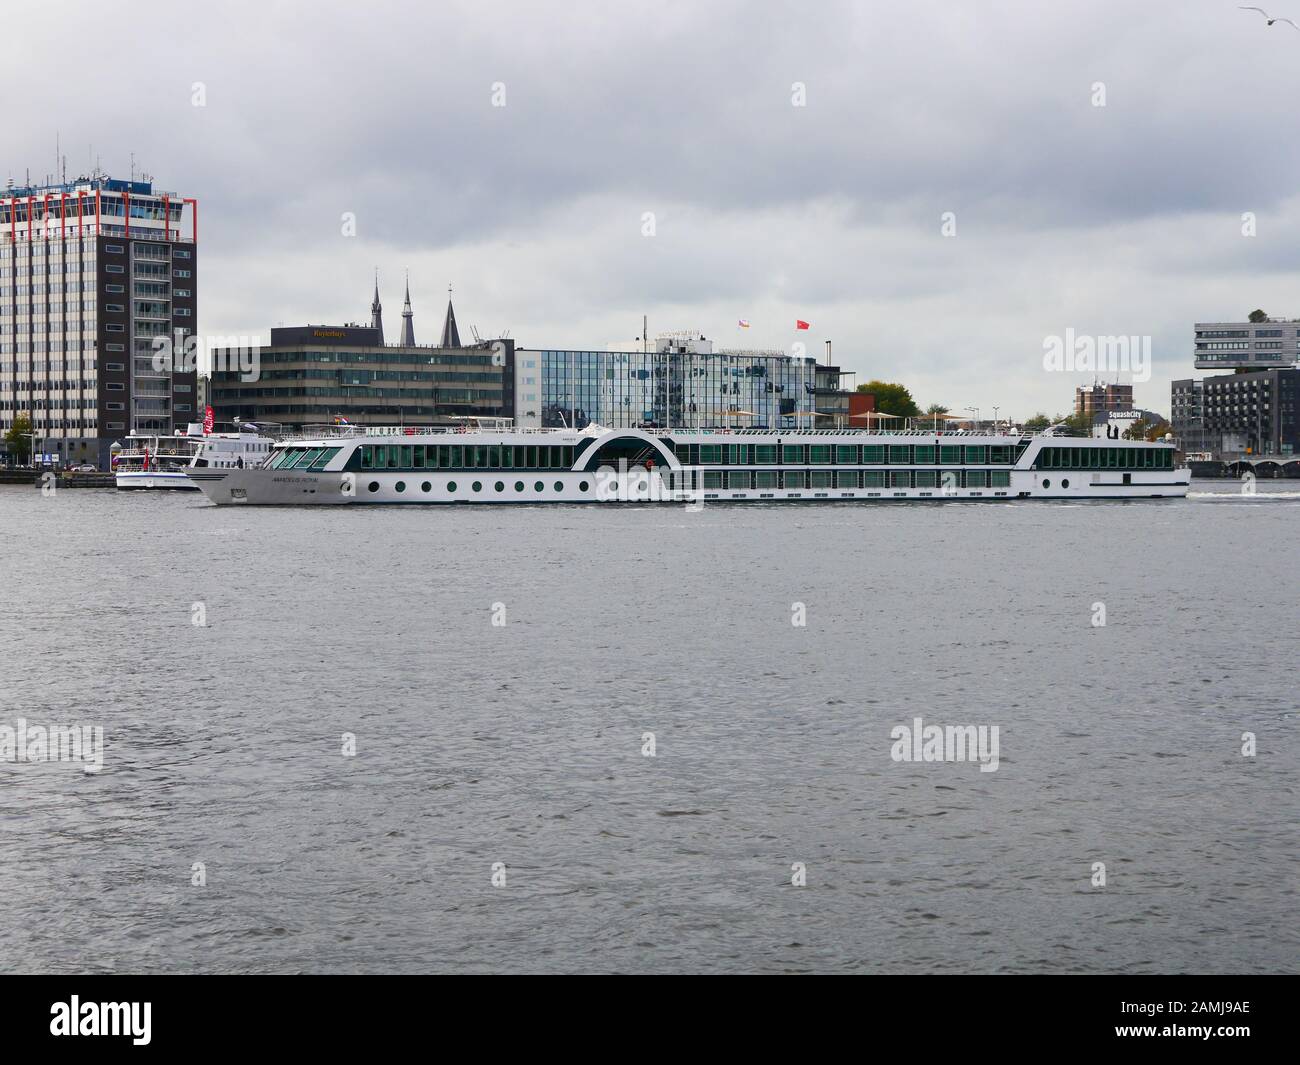 A river cruise boat on the Amstel river, Amsterdam, Netherlands Stock Photo